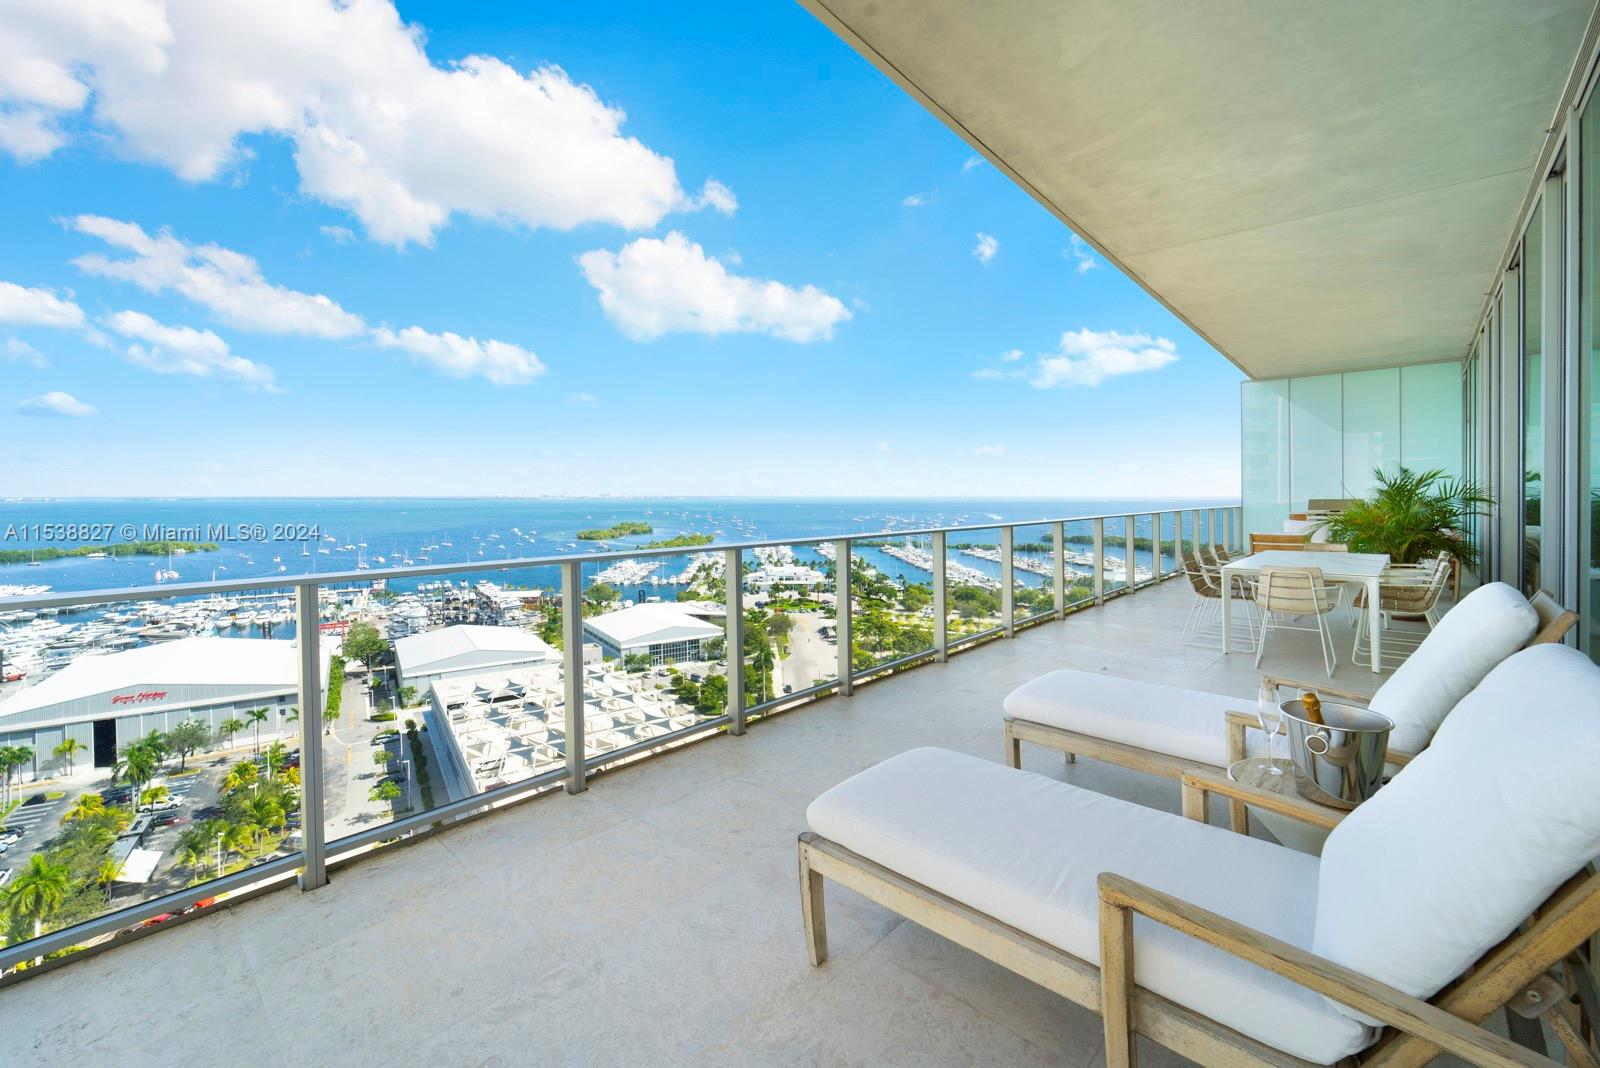 Nestled in the heart of Coconut Grove in the highly-sought after Grove at Grand Bay condominium, this 4-BD, 3.5-BA unit offers endless water views and a unique living experience for the most discerning buyers. Encompassing 4,933 SF with 12-ft floor-to-ceiling impact windows, the unit occupies a coveted spot in the South Tower's NE corner, with sweeping panoramic views of Biscayne Bay and the city. An impressive gourmet kitchen boasts an expansive center island, premium appliances, a gas cooktop, and ample counter space. The unit showcases high-end materials and finishes, exhibiting a sophisticated and refined ambiance. The open floor plan is ideal for displaying art collections and hosting guests. Incredible opportunity to own in one of the most beautiful buildings in Coconut Grove.